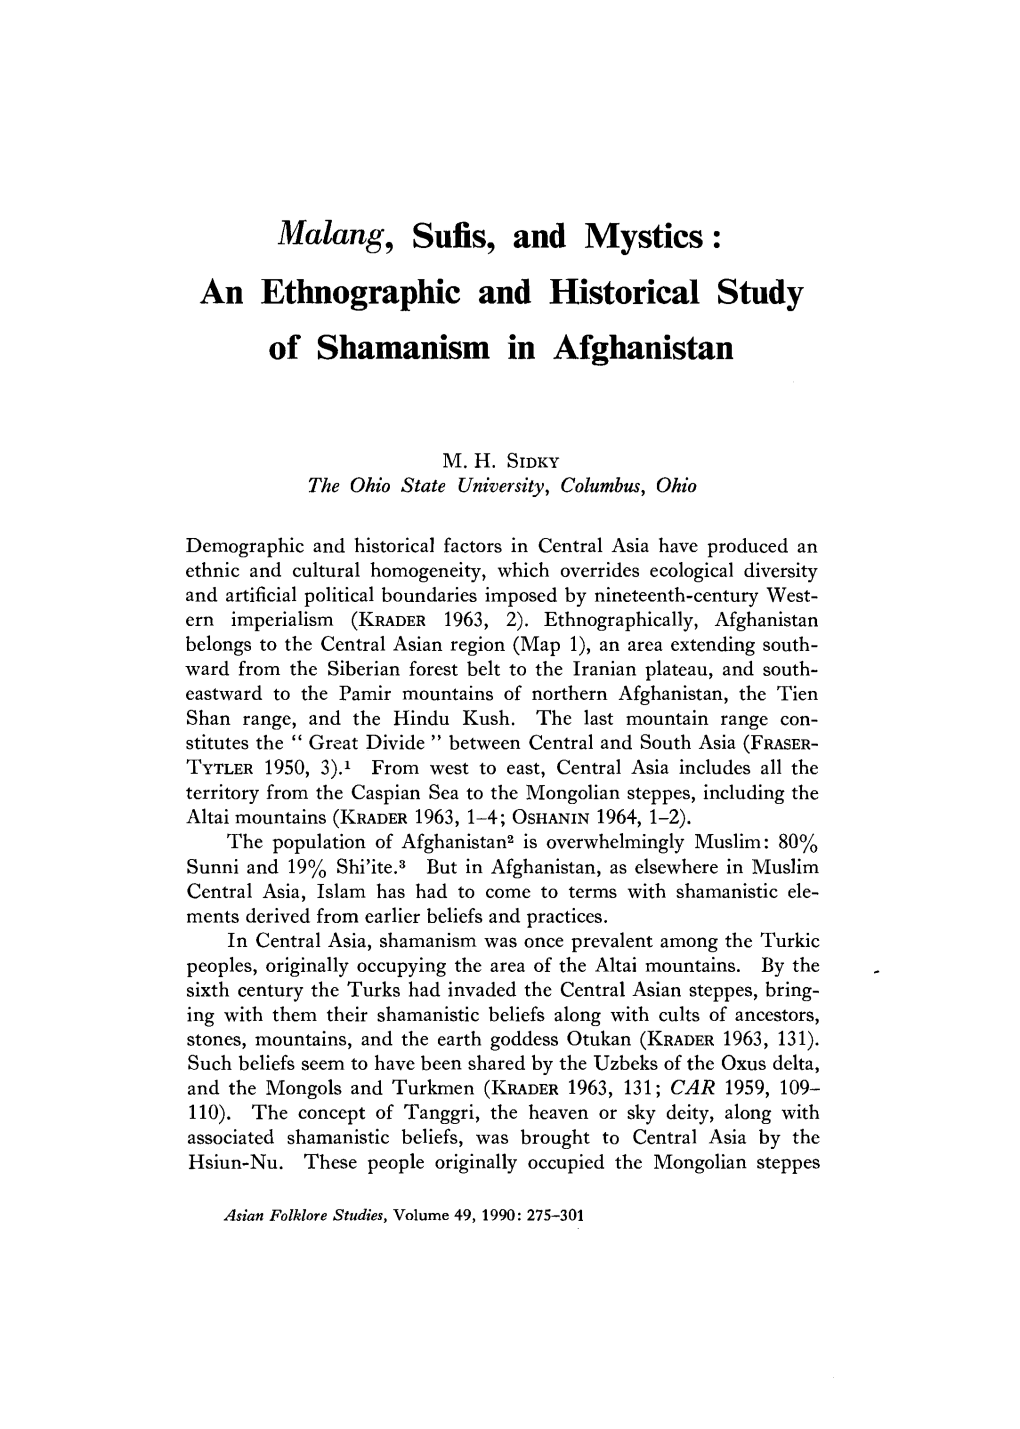 Malang，Sufis, and Mystics: an Ethnographic and Historical Study of Shamanism in Afghanistan